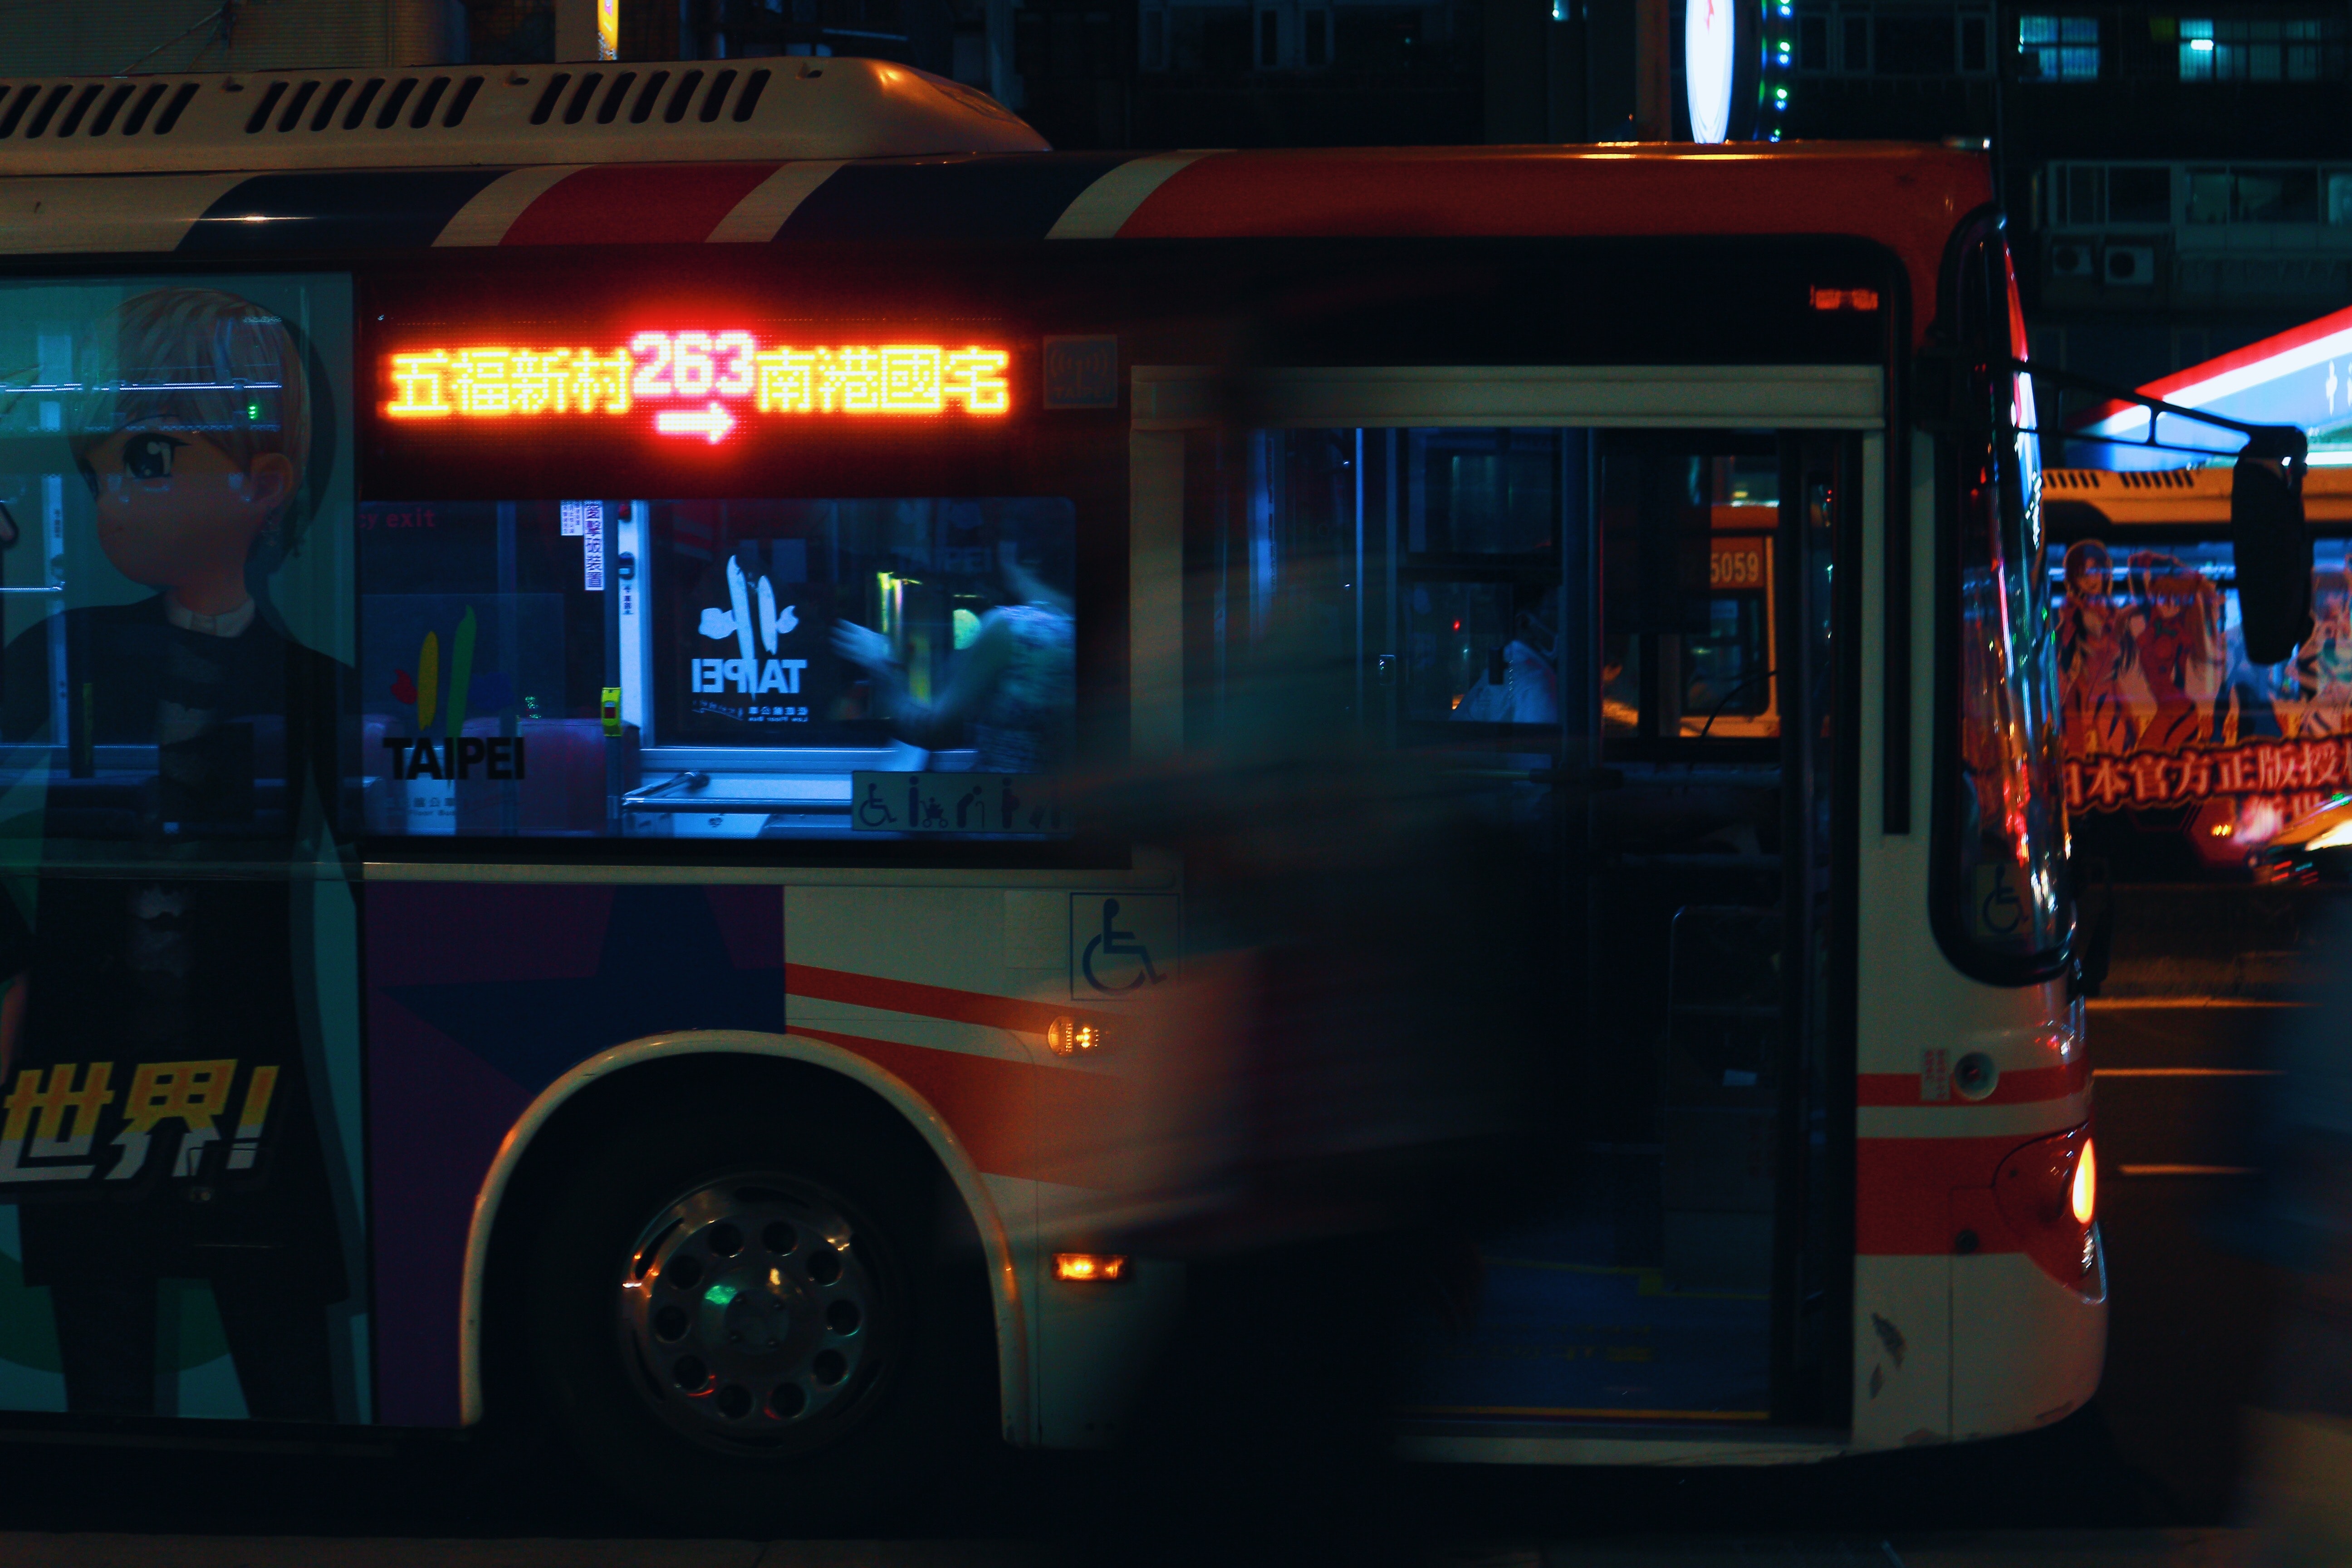 Silver city bus on a city street at night photo